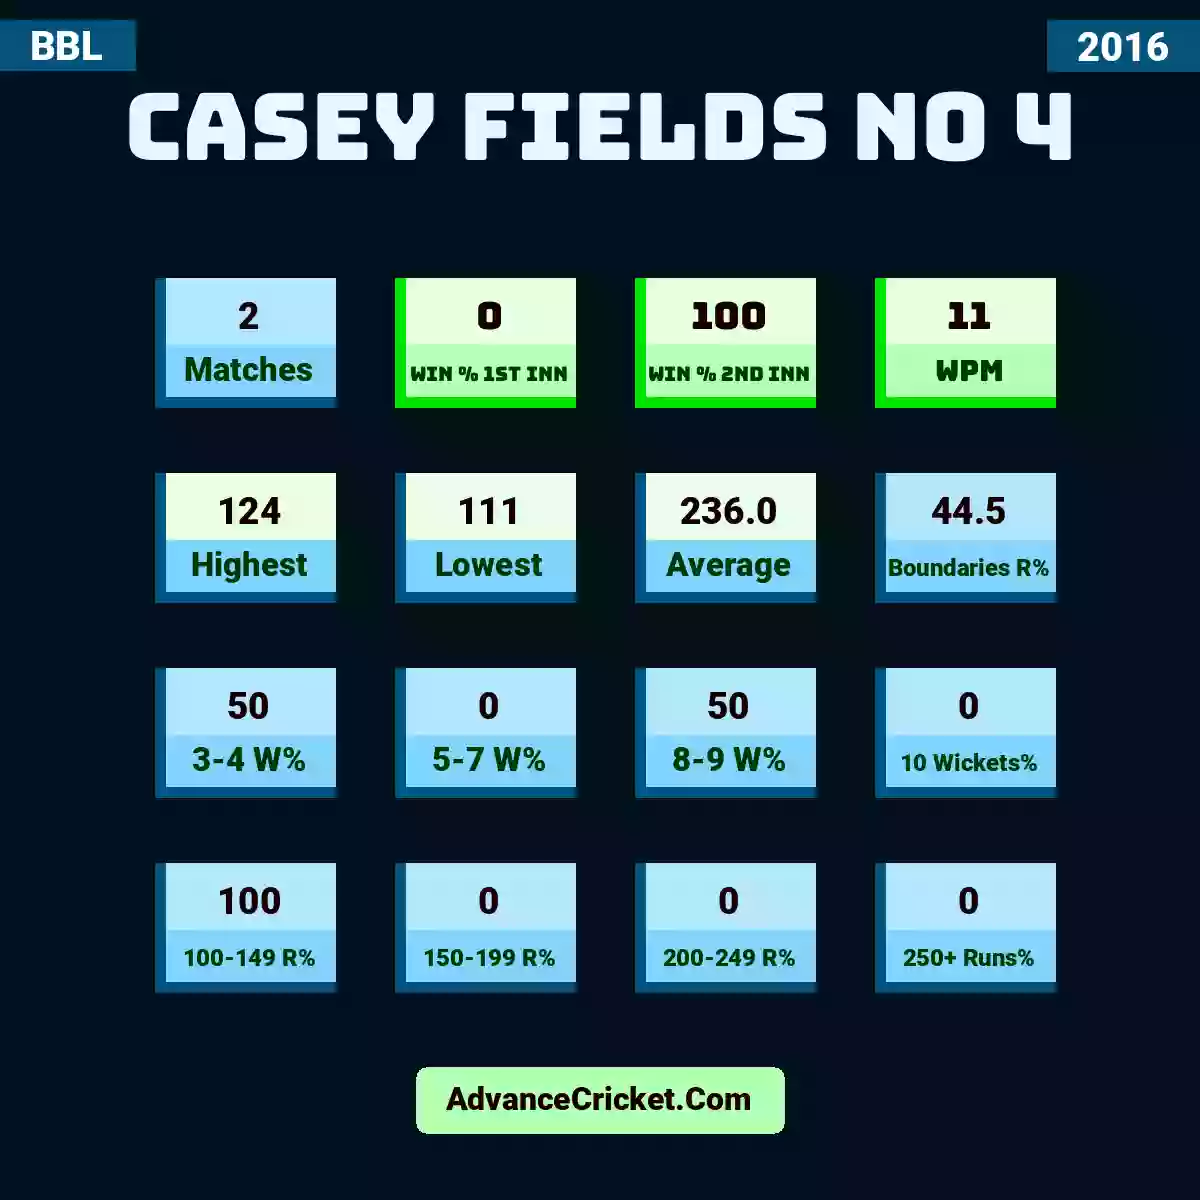 Image showing Casey Fields No 4 with Matches: 2, Win % 1st Inn: 0, Win % 2nd Inn: 100, WPM: 11, Highest: 124, Lowest: 111, Average: 236.0, Boundaries R%: 44.5, 3-4 W%: 50, 5-7 W%: 0, 8-9 W%: 50, 10 Wickets%: 0, 100-149 R%: 100, 150-199 R%: 0, 200-249 R%: 0, 250+ Runs%: 0.